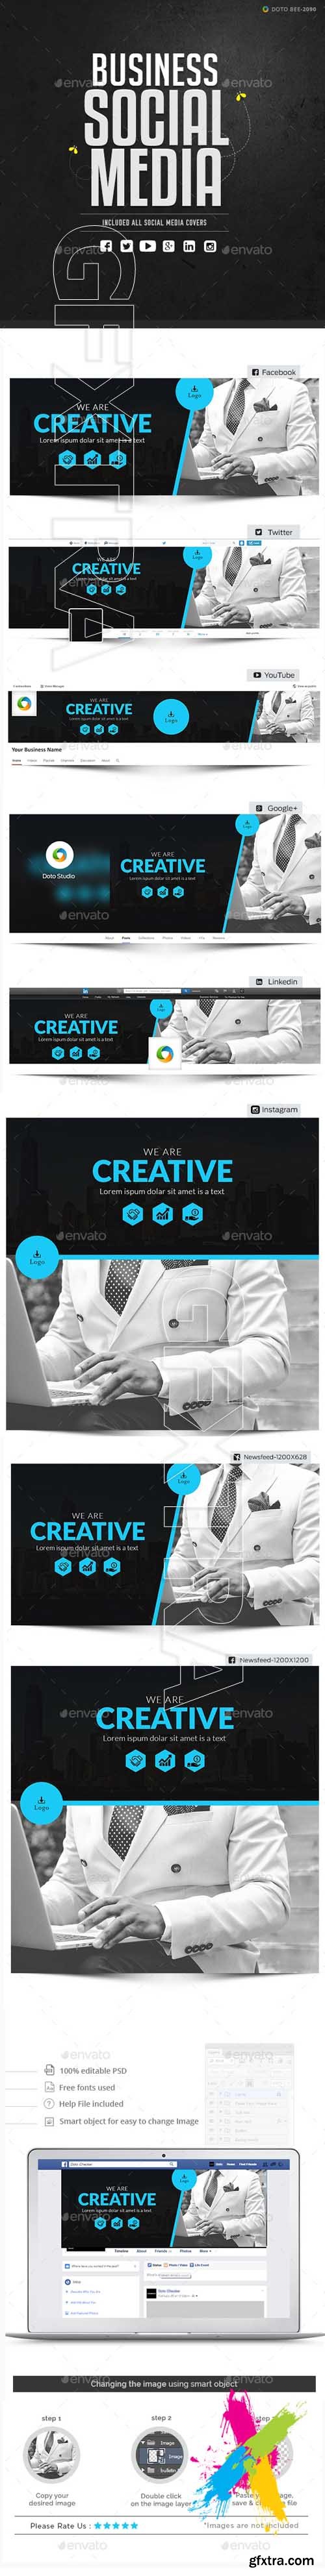 Graphicriver - Business Social Media Pack 20139409